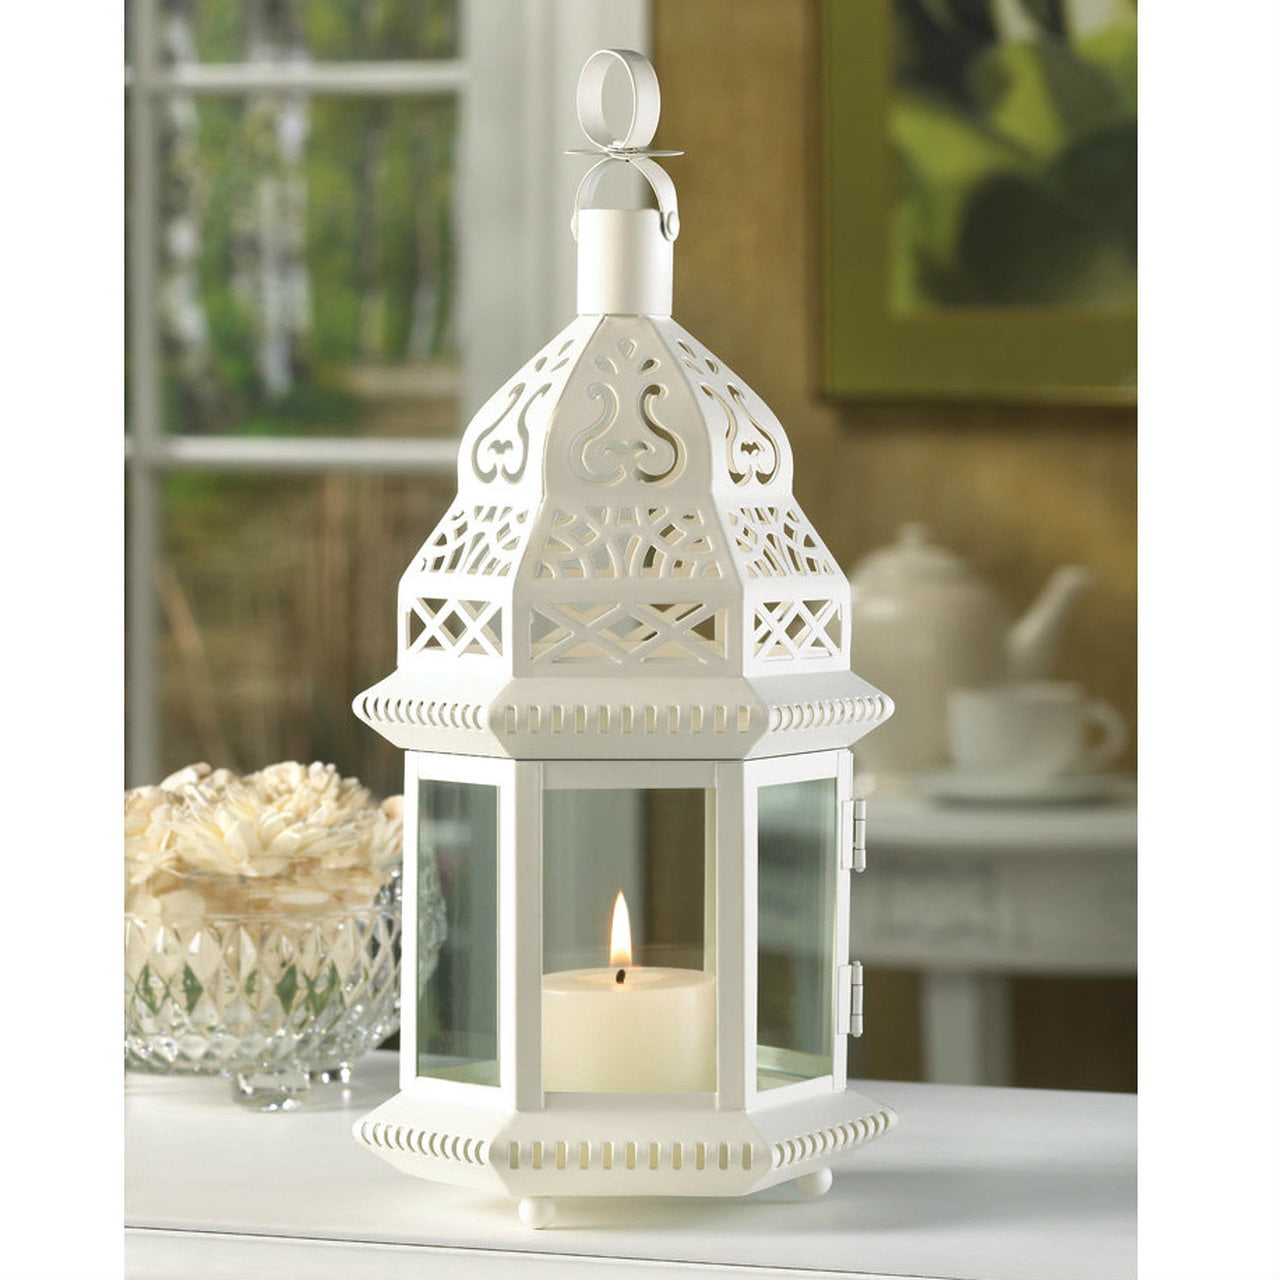 4 Moroccan Style Candle Lanterns Creamy White w/ Clear Glass Panels 13" High 